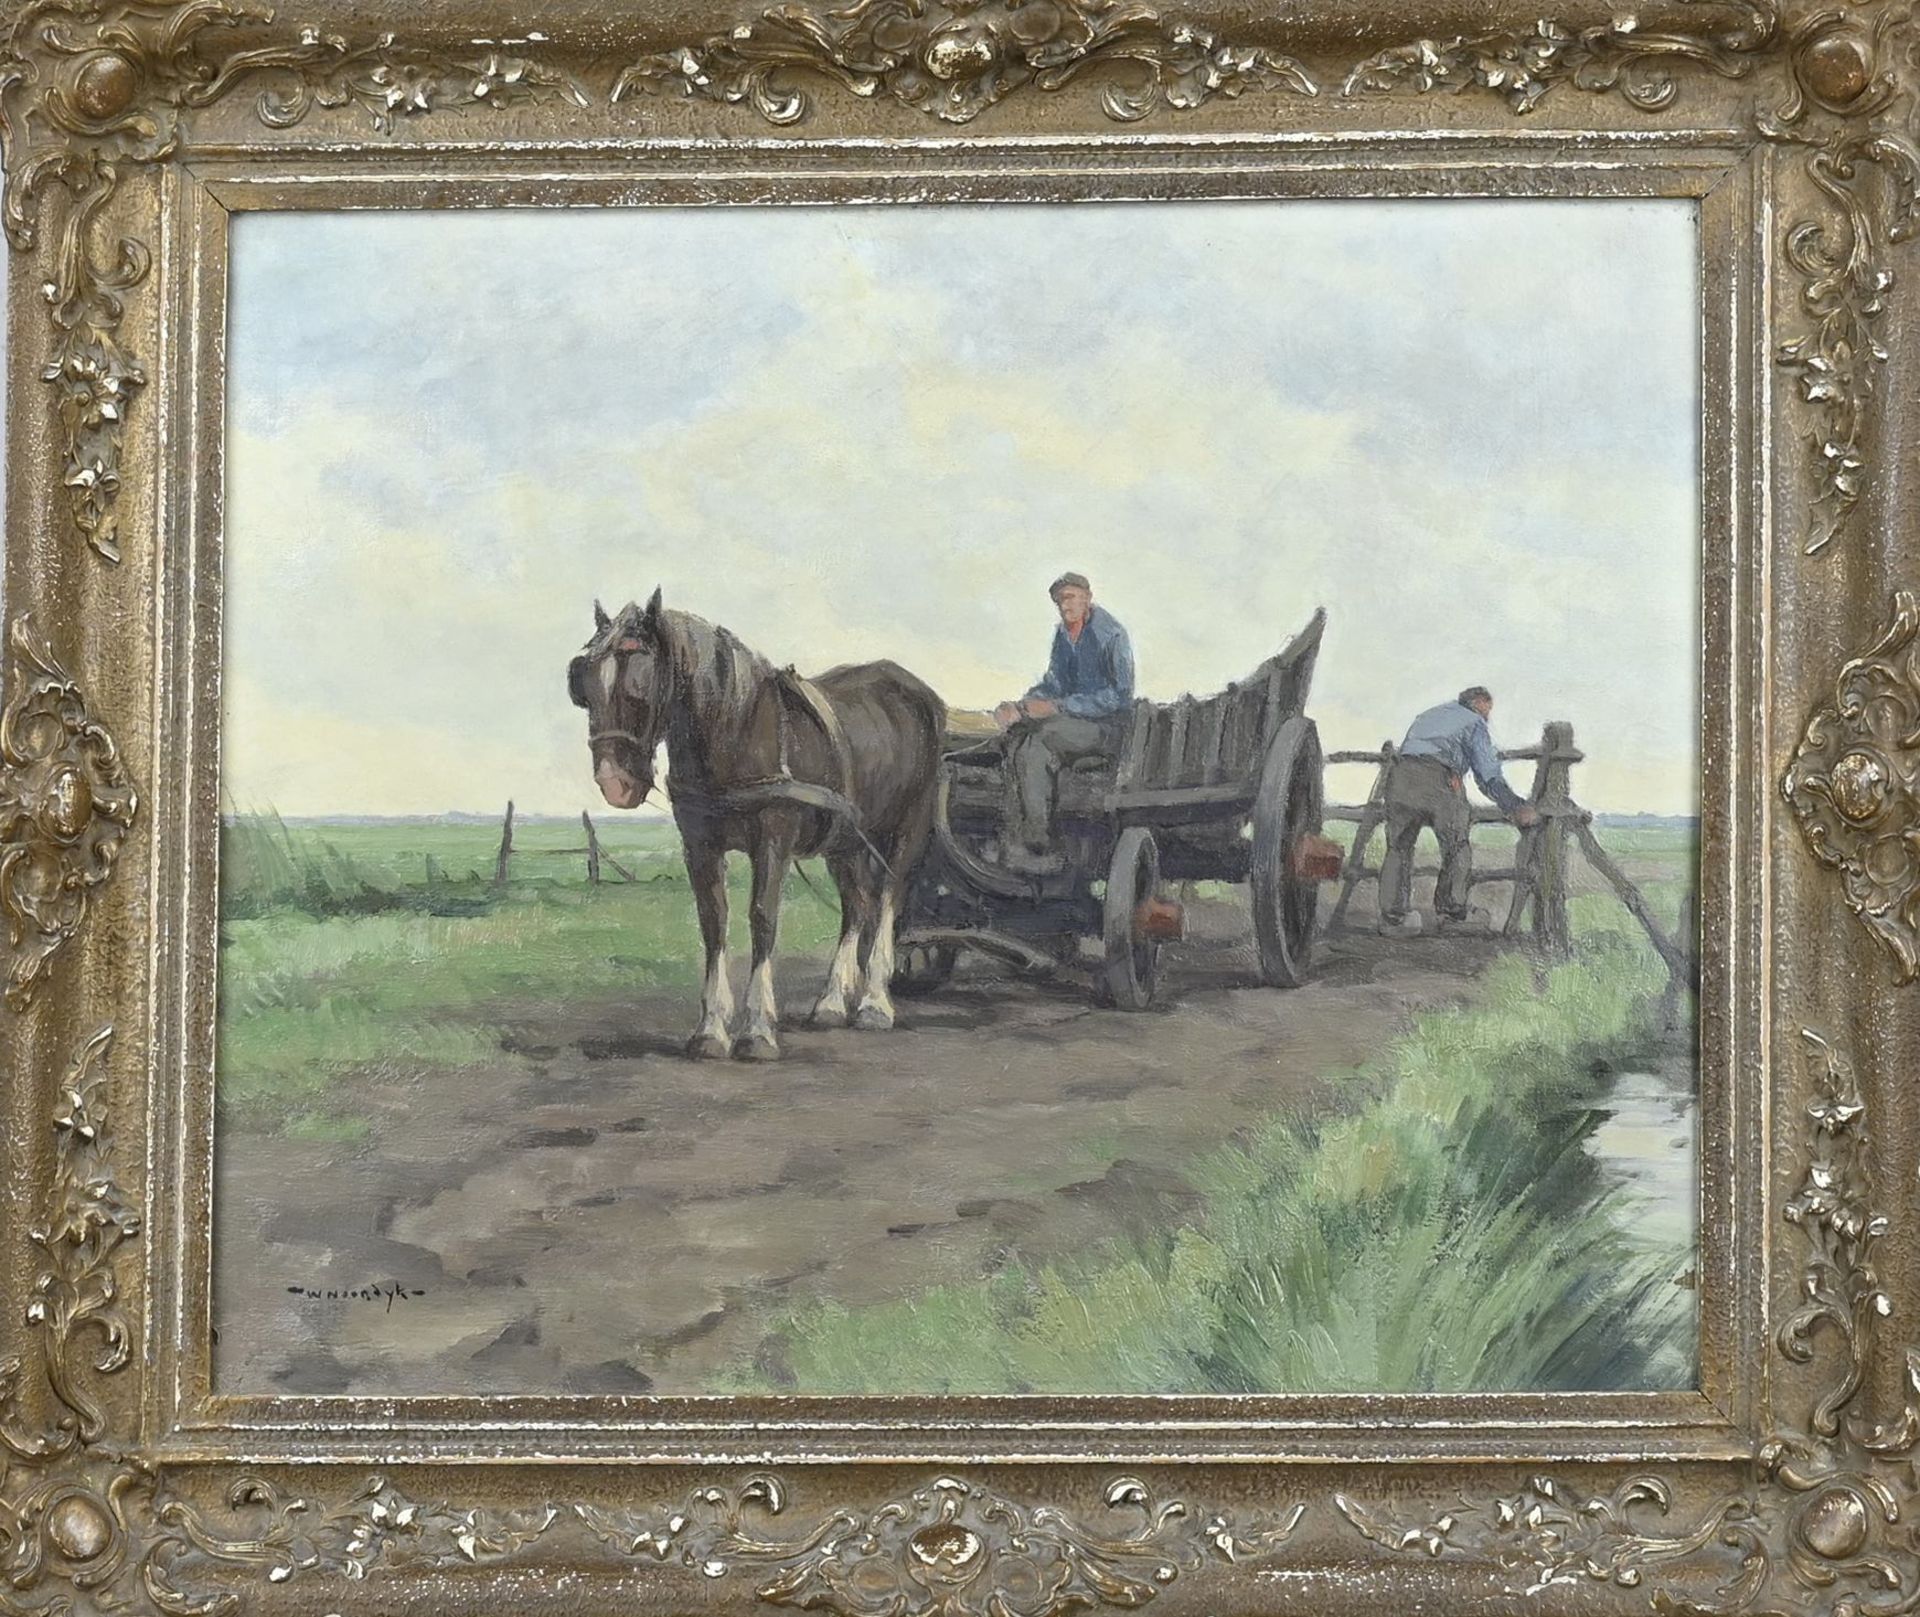 Willem Noordijk, Landscape with farmers and horse cart